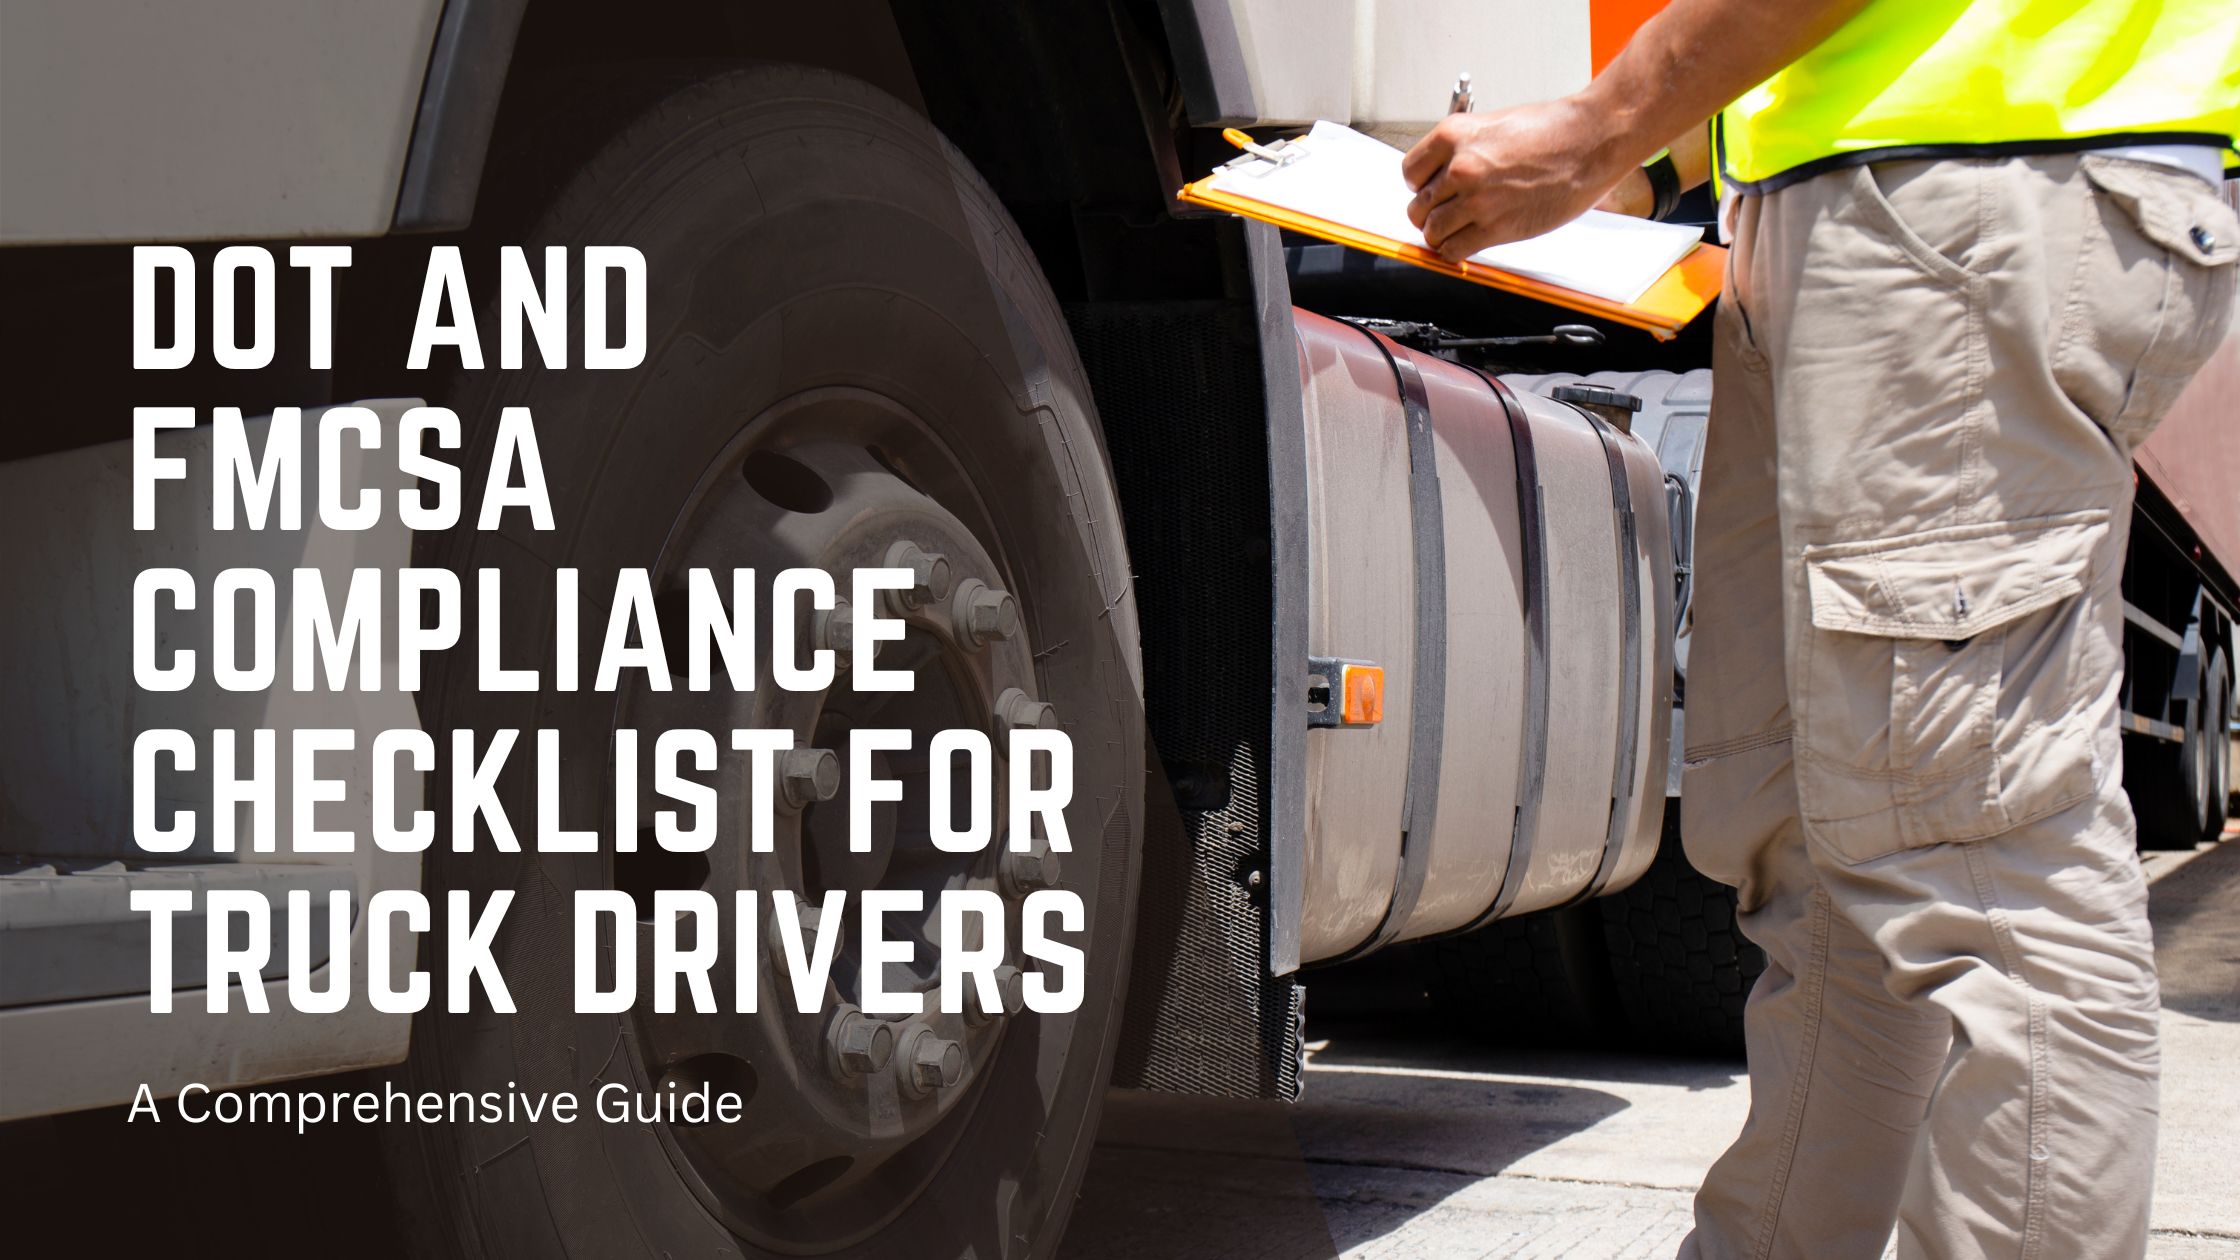 DOT and FMCSA Compliance Checklist for Truck Drivers: A Comprehensive Guide